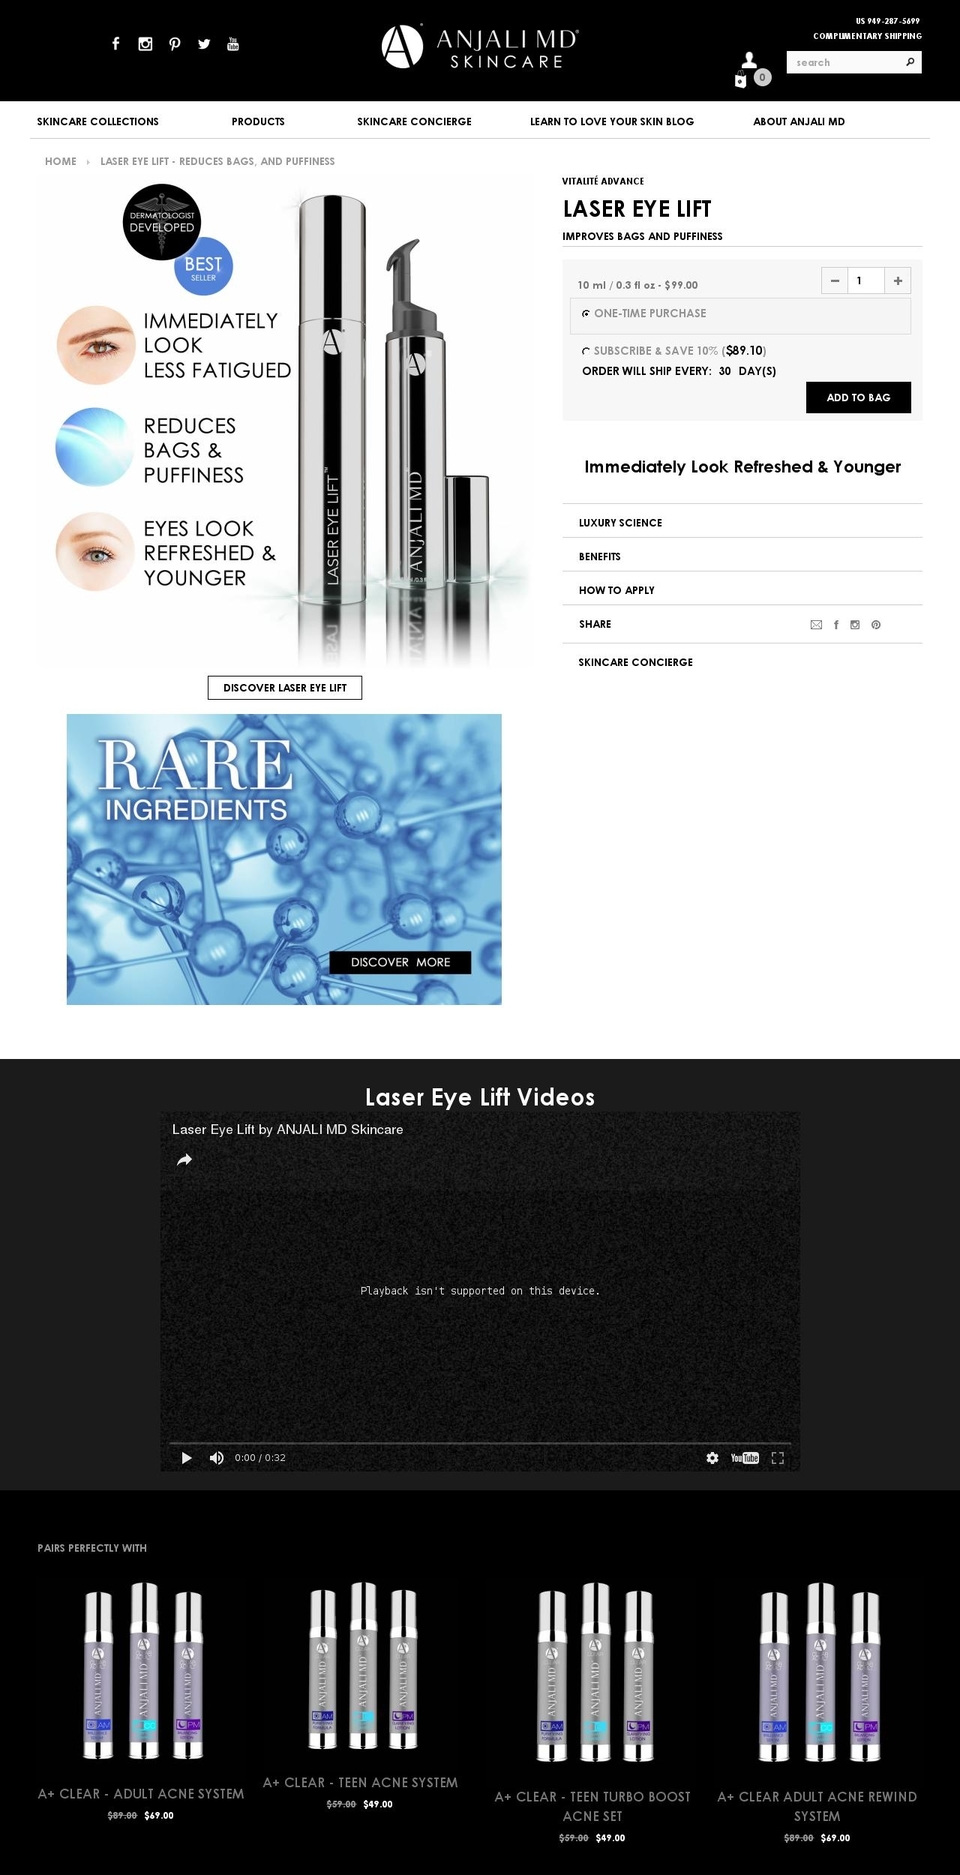 ANJALI MD - NEW SITE (ELLA) Shopify theme site example lasereyelift.us